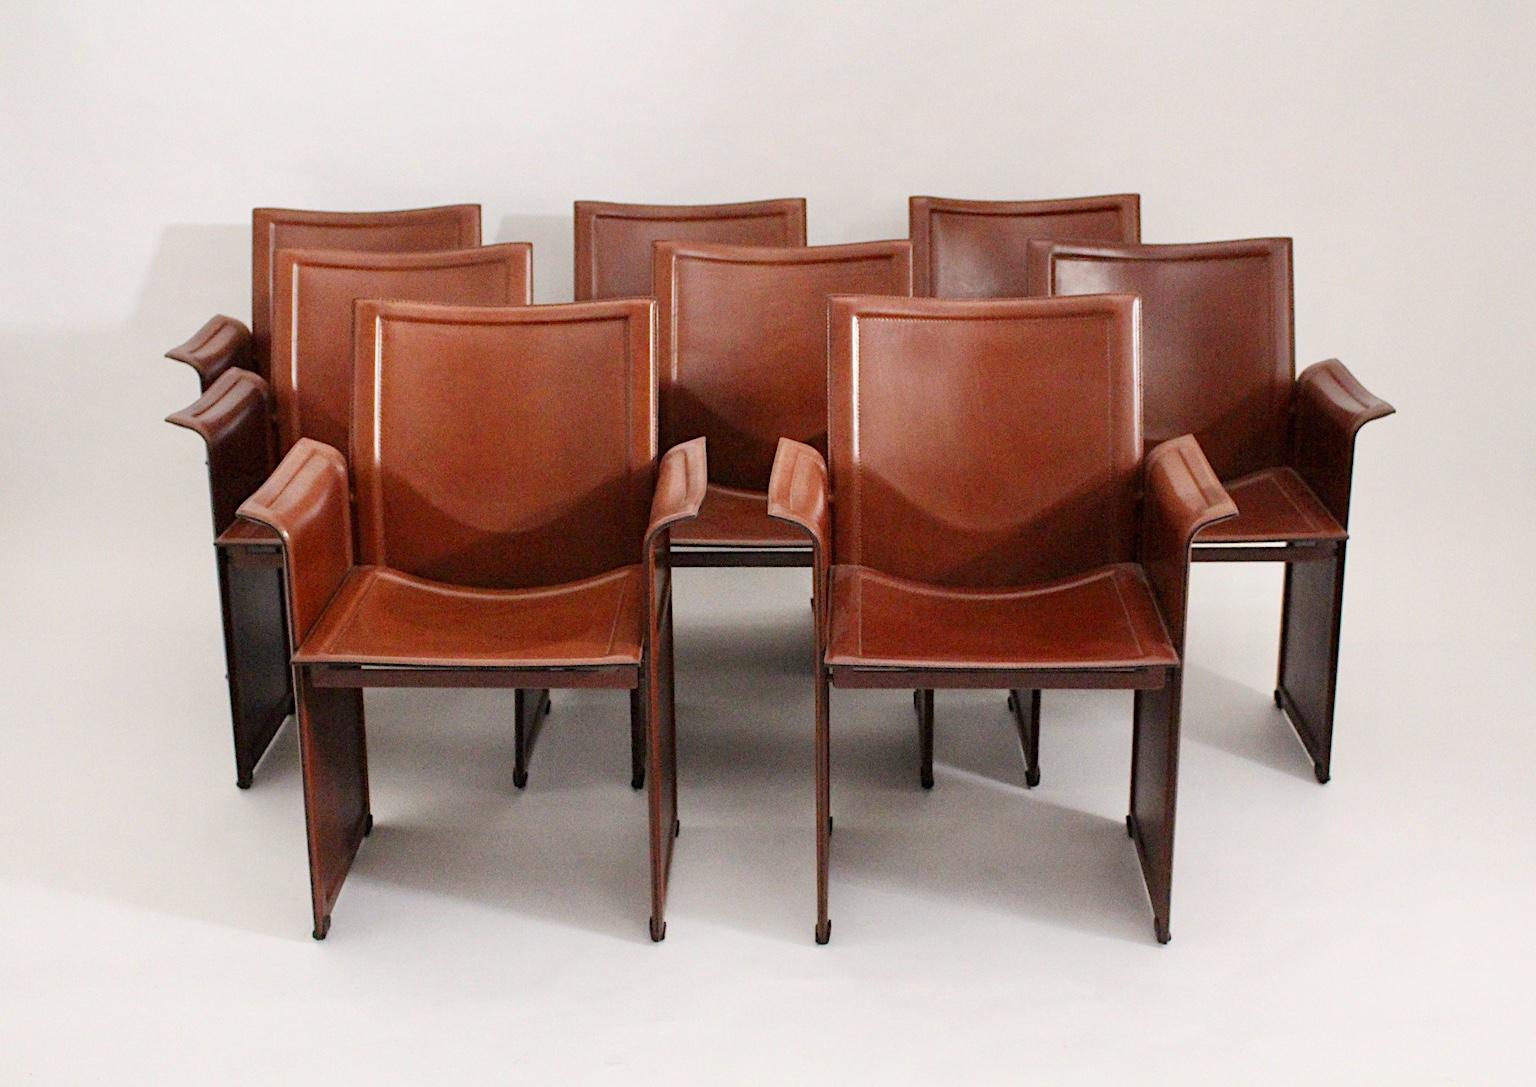 20th Century Modern Brown Leather Vintage Dining Chairs Tito Agnoli for Matteo Grassi, 1979 For Sale